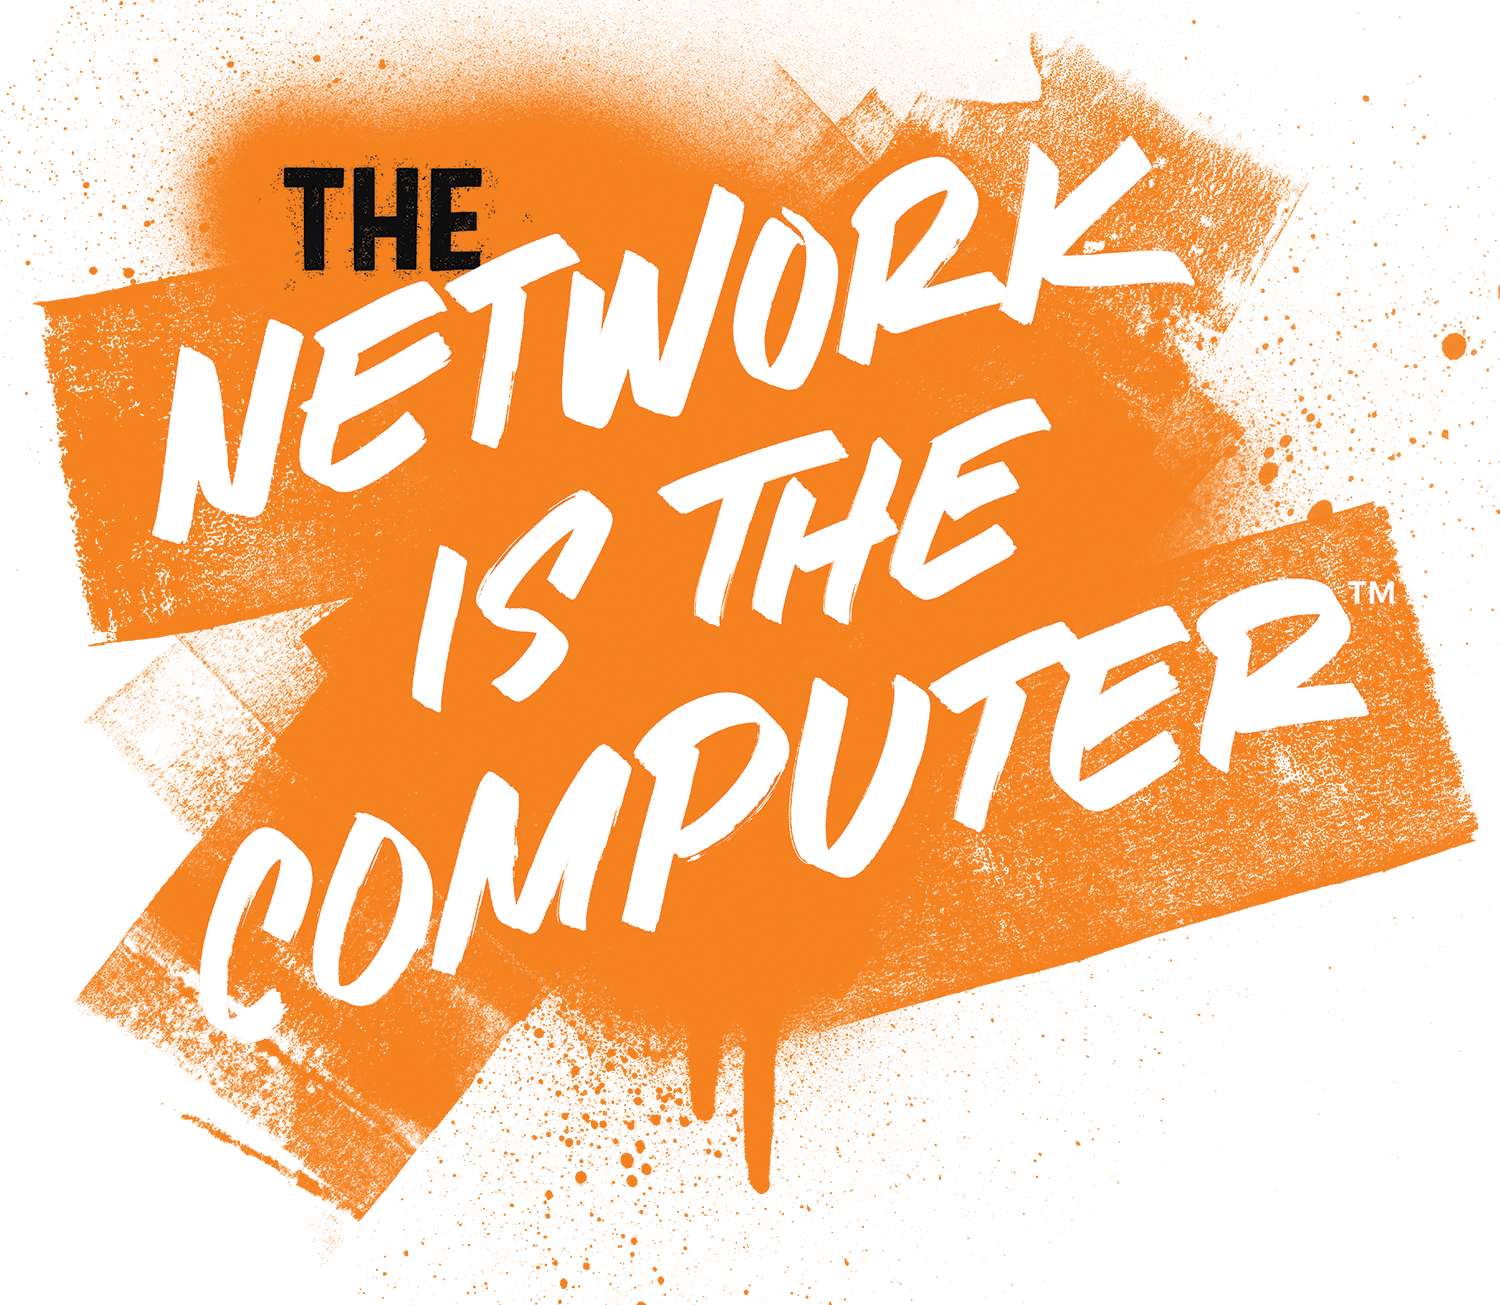 The Network is the Computer: A Conversation with John Gage